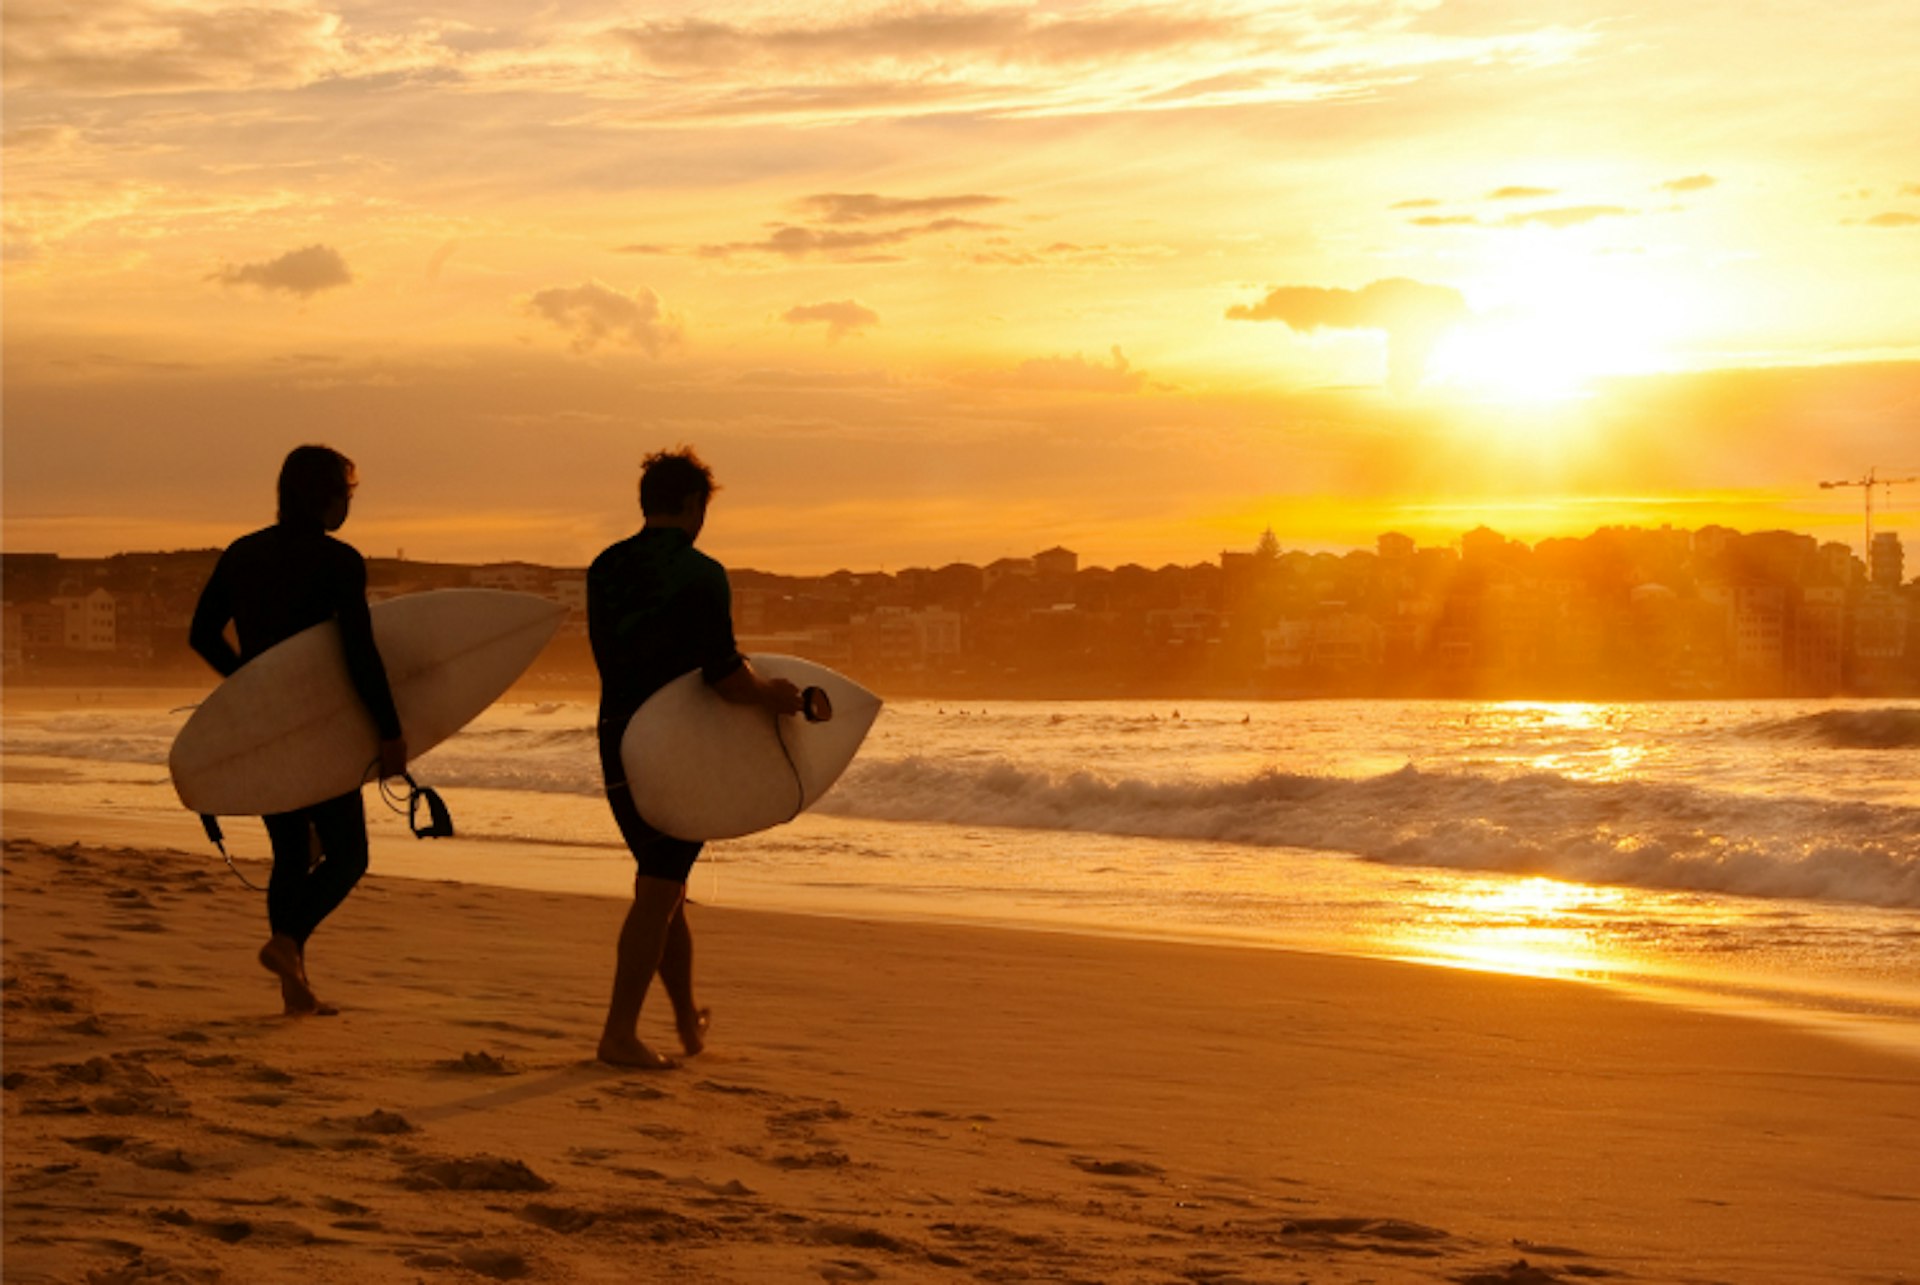 Bondi Beach is popular with surfers of all abilities. Image by Kokkai Ng / Moment / Getty Images